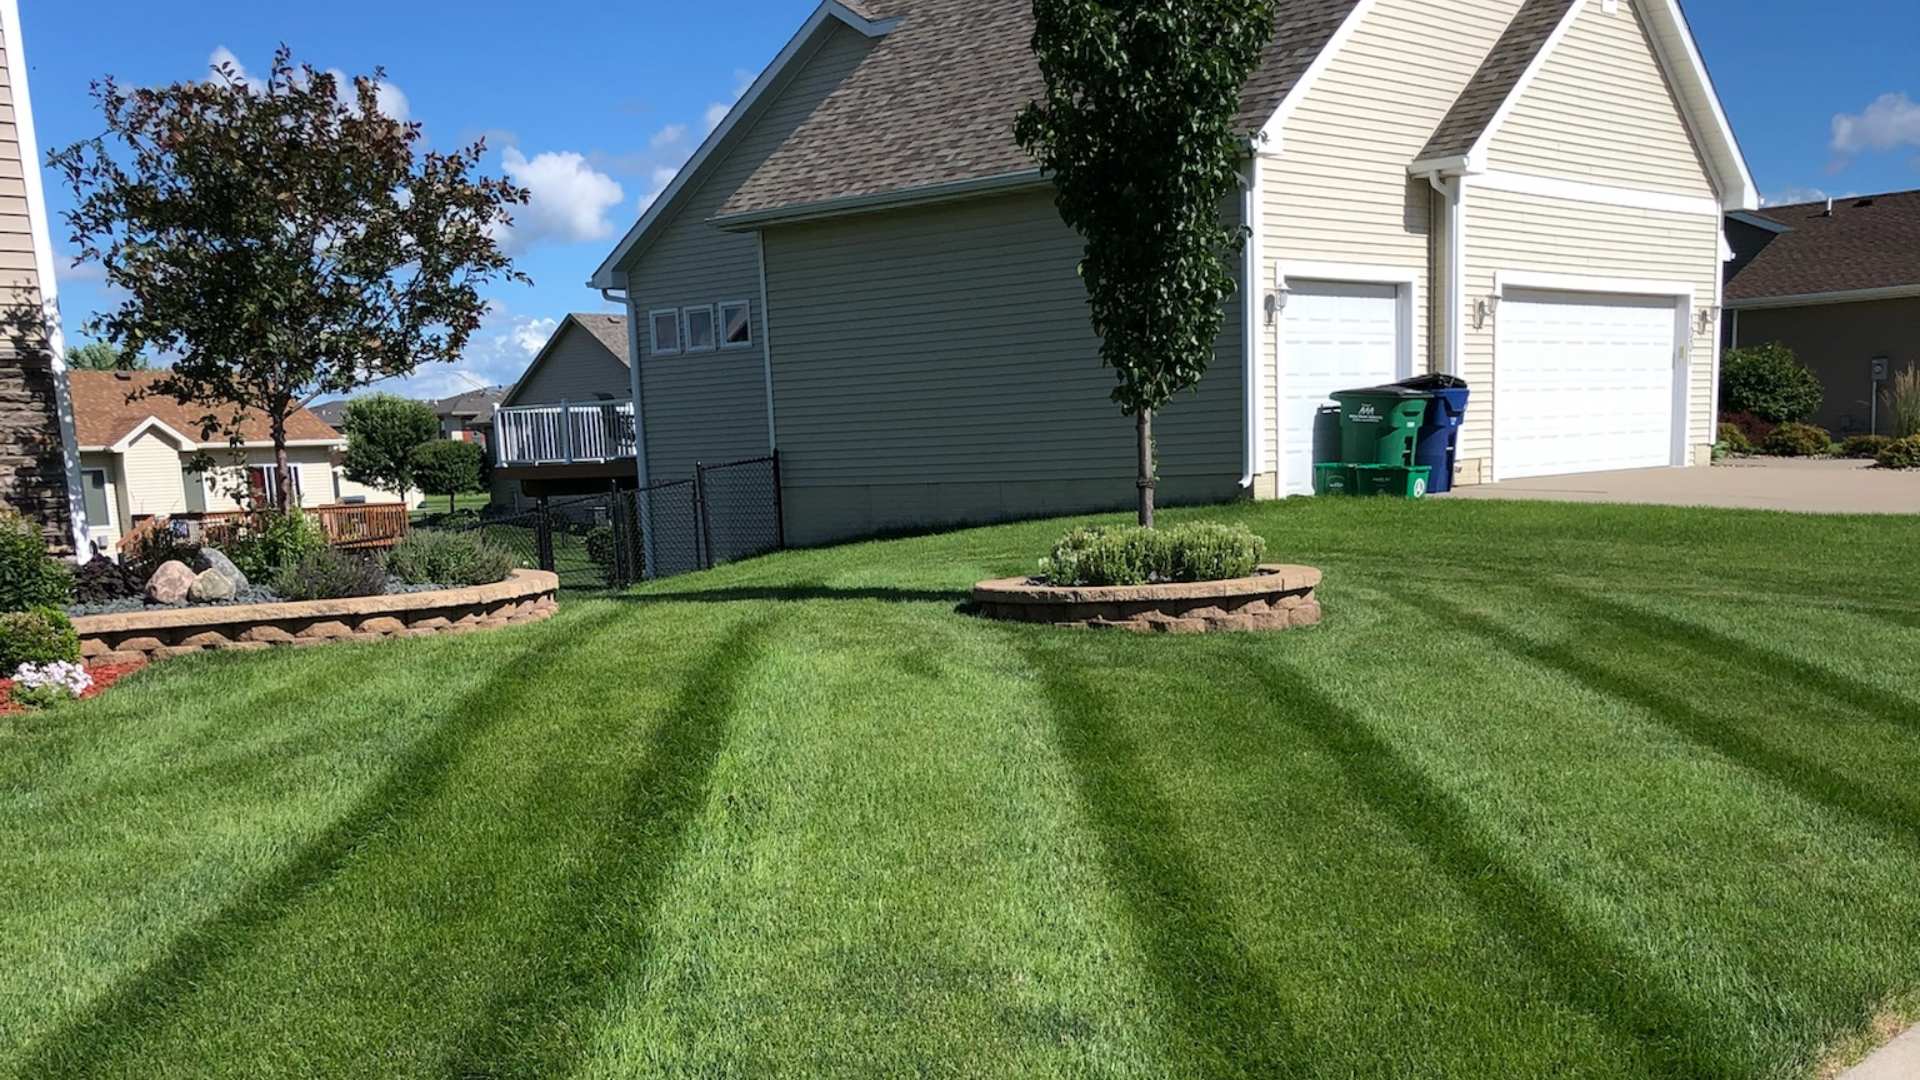 Beautiful home lawn at a property in Urbandale, IA.